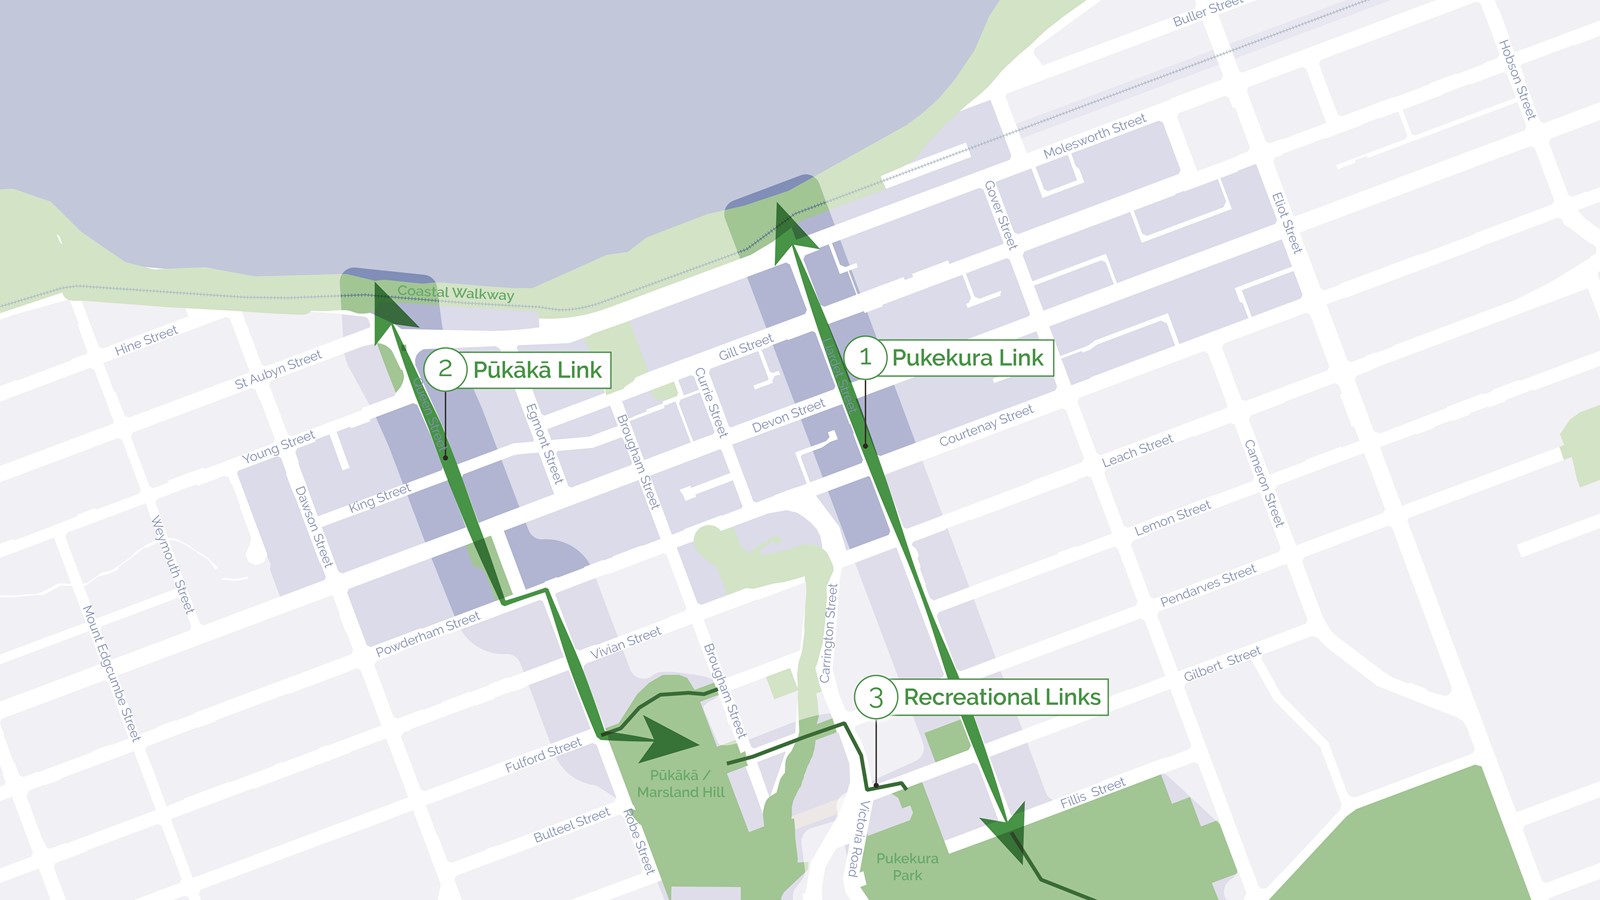 Map of New Plymouth showing green links